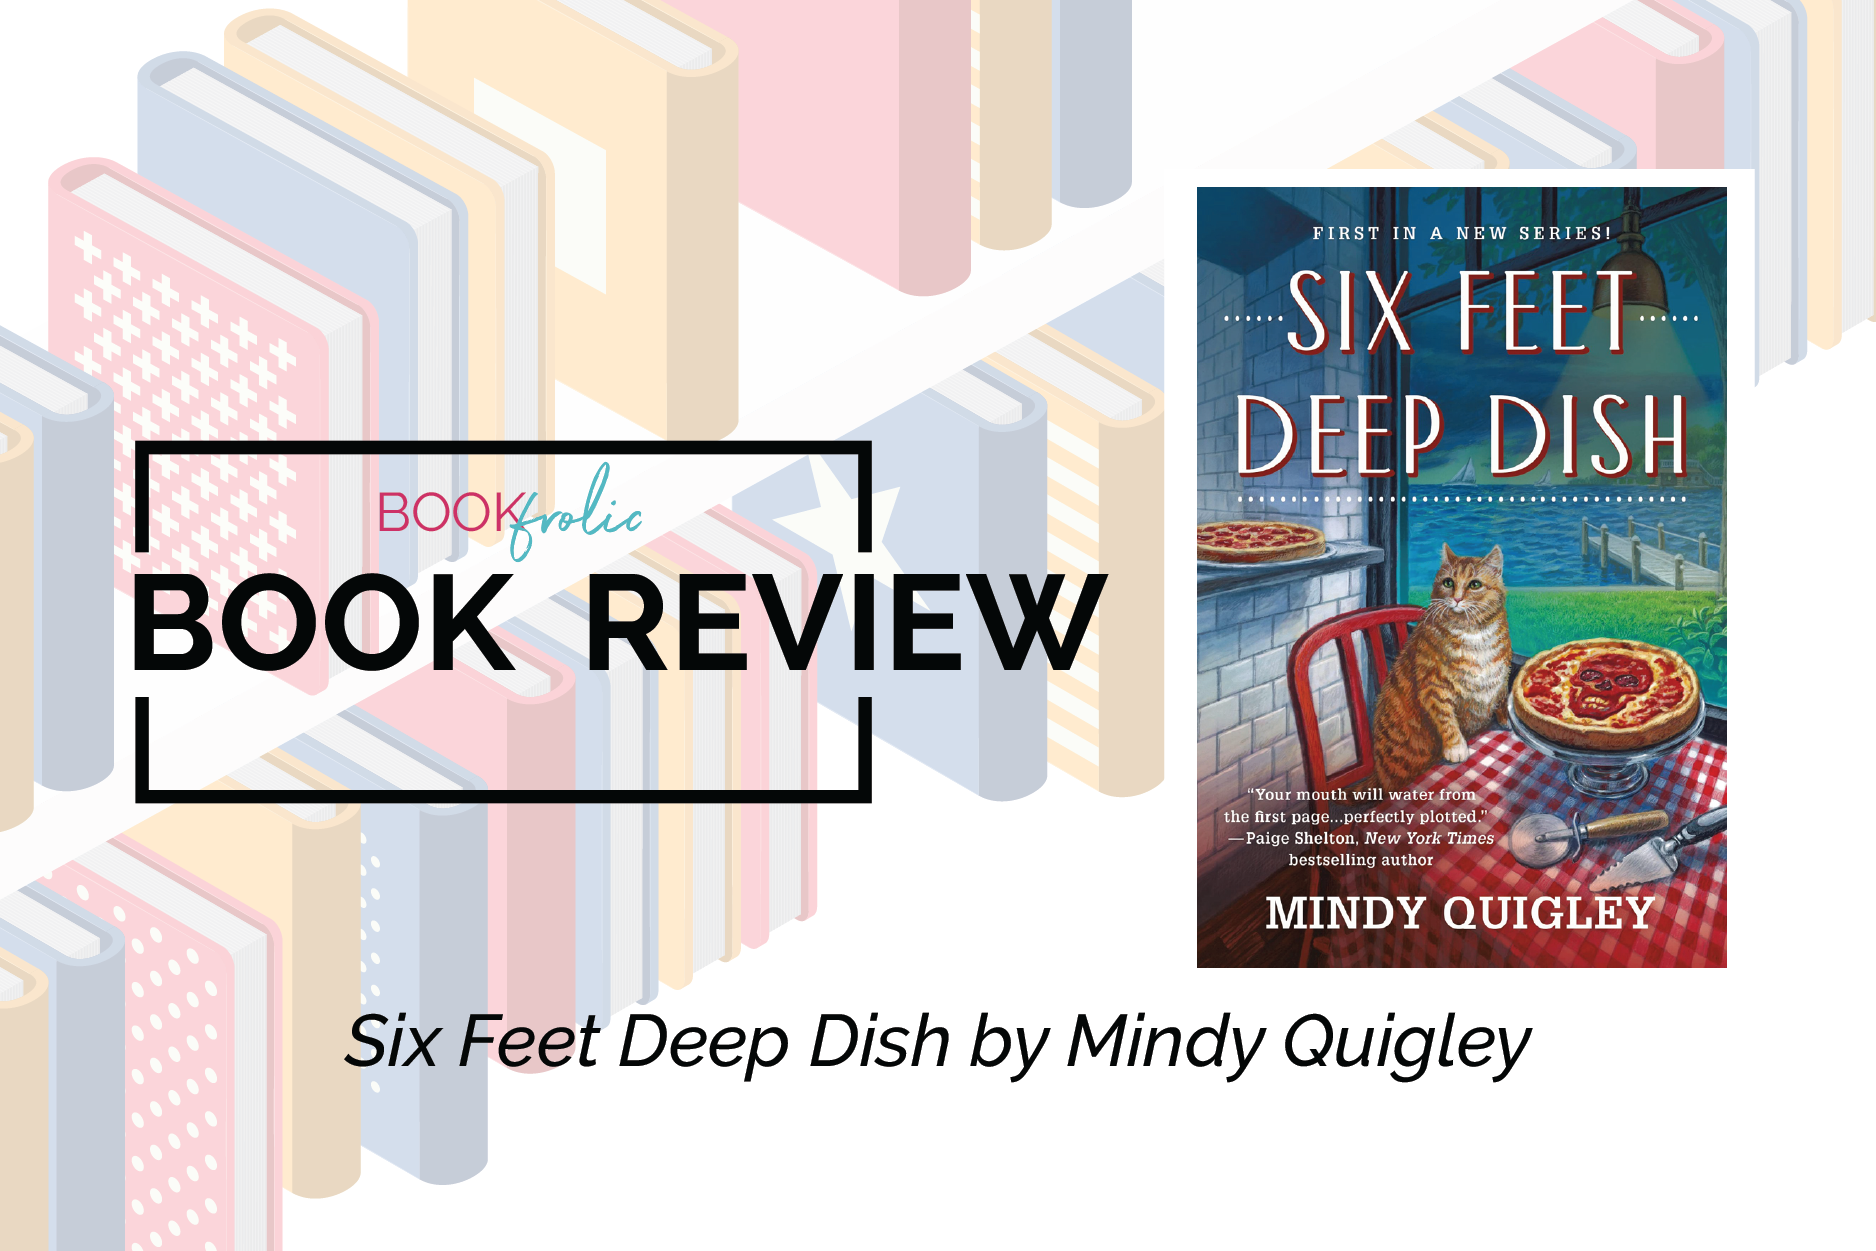 banner for book review of Six Feet Deep Dish by Mindy Quigley